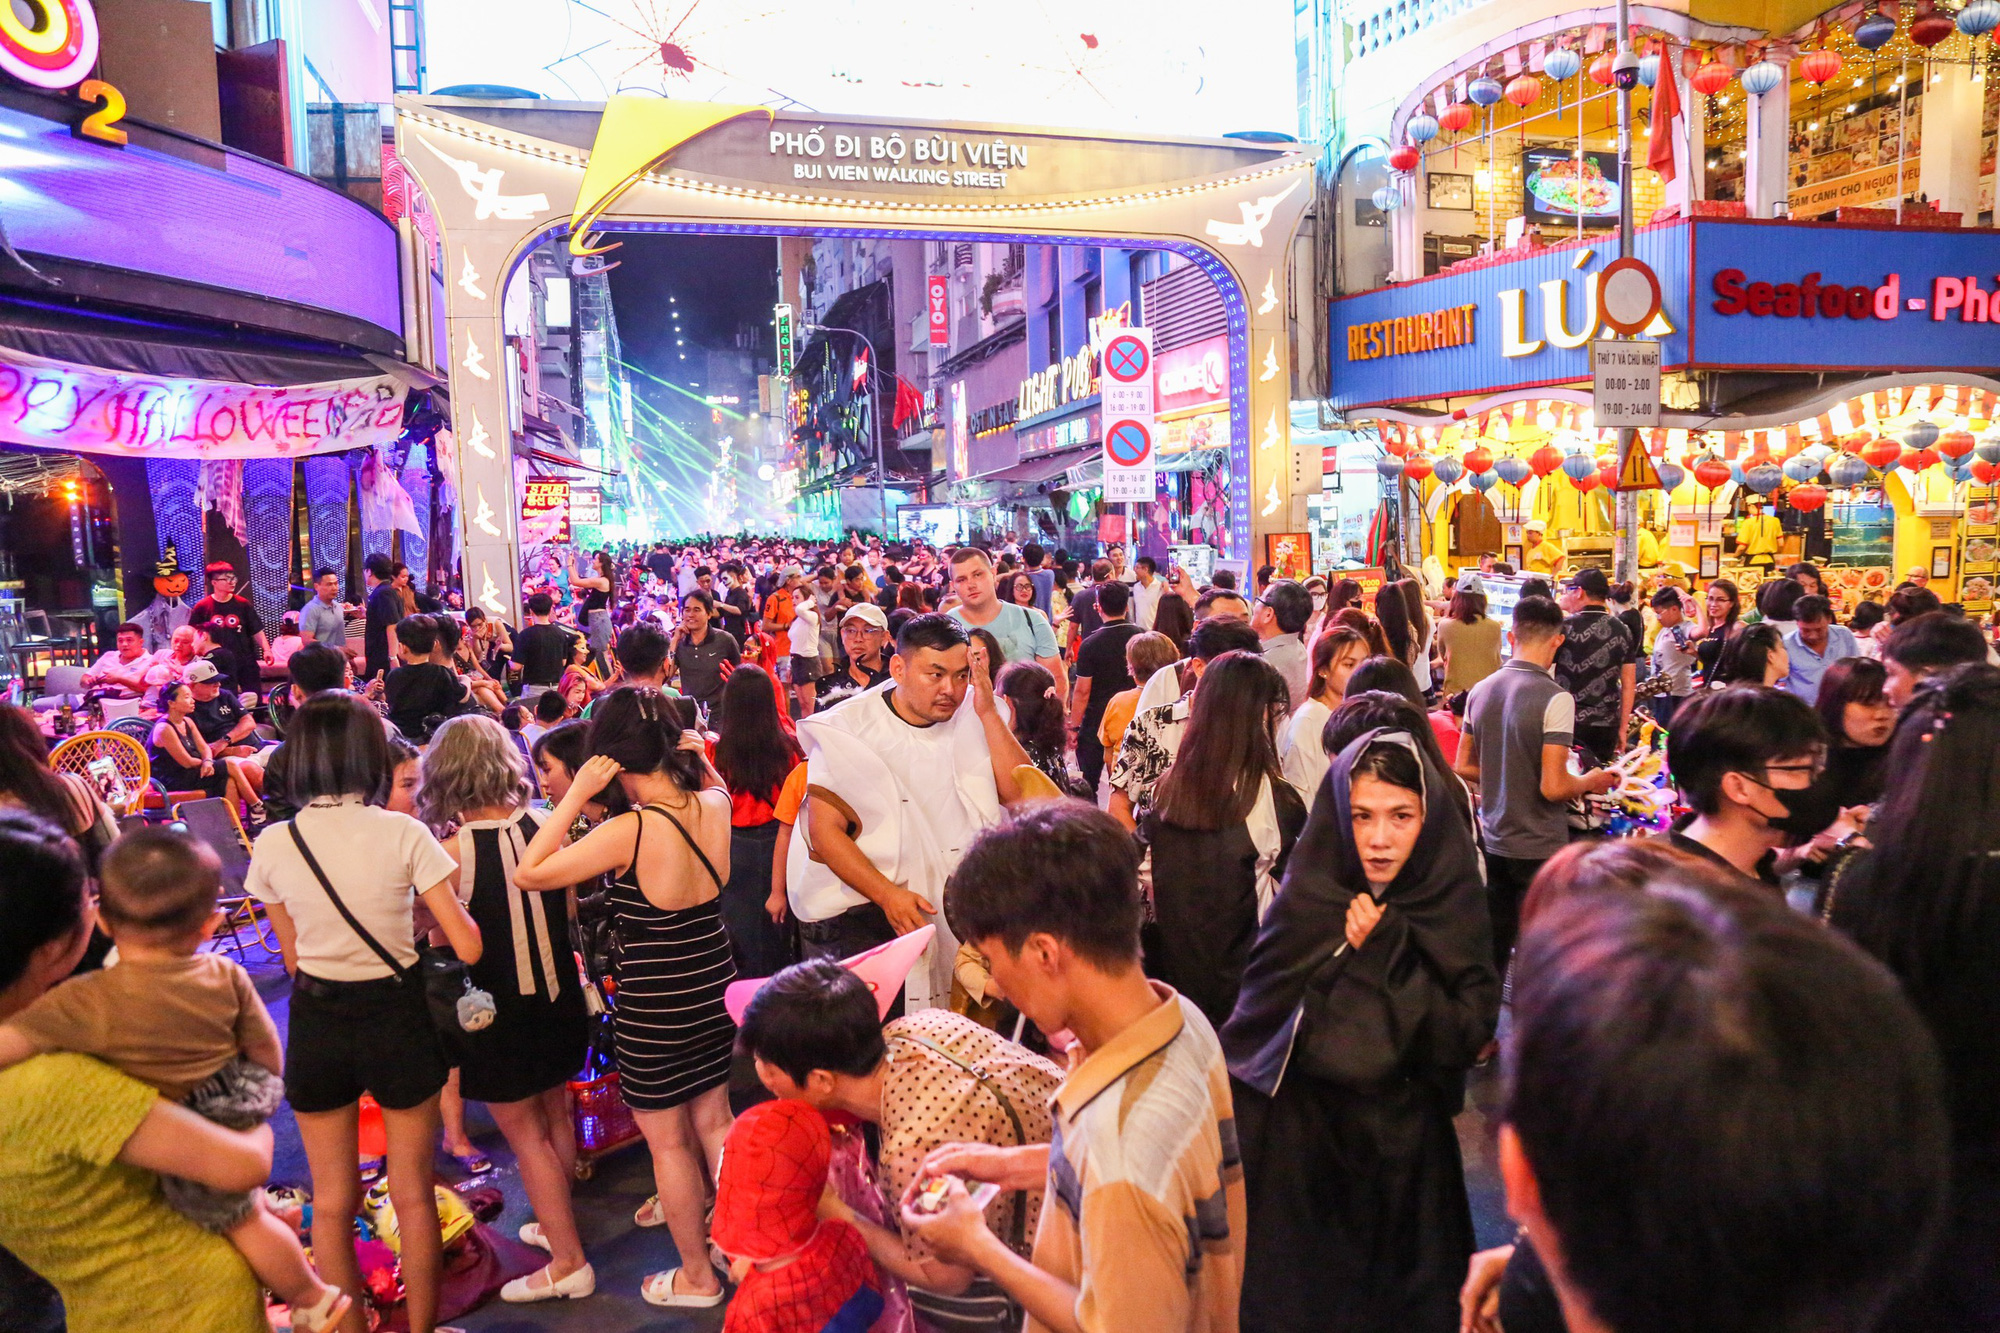 Bui Vien West Street was packed with people going out to celebrate Halloween on the evening of October 31 